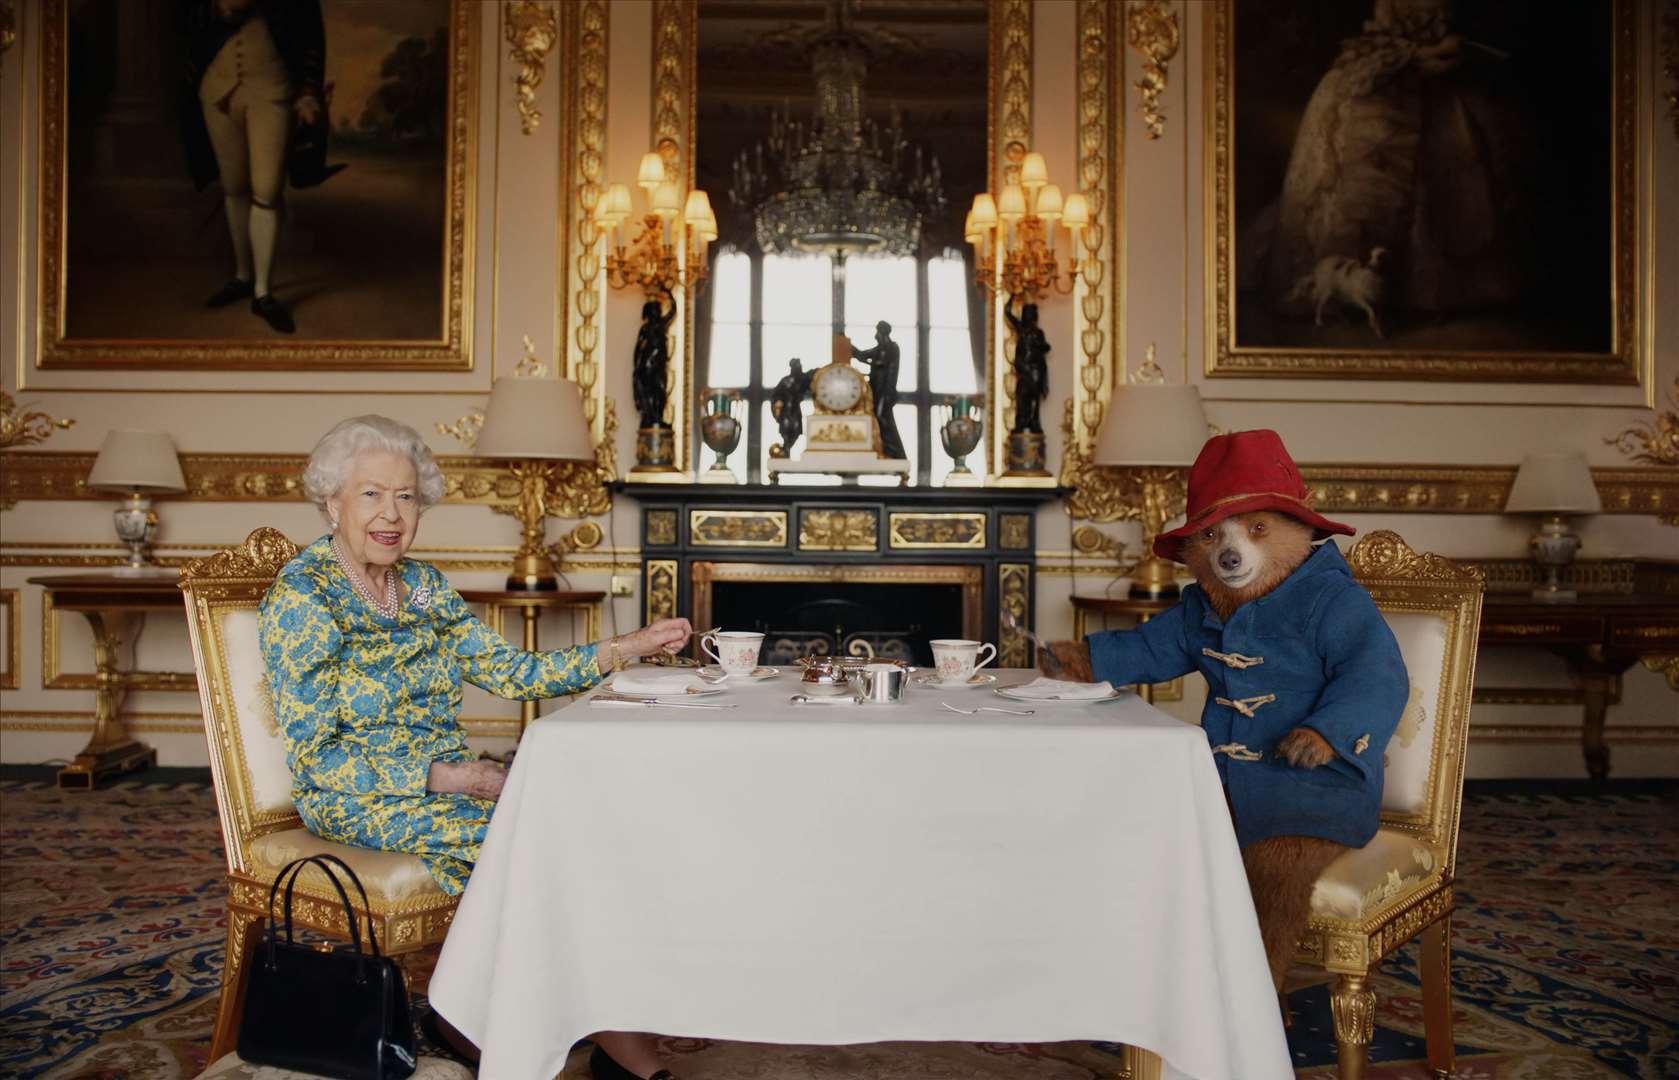 The Queen and Paddington (Buckingham Palace/ Studio Canal/BBC Studios/Heyday Films/PA)